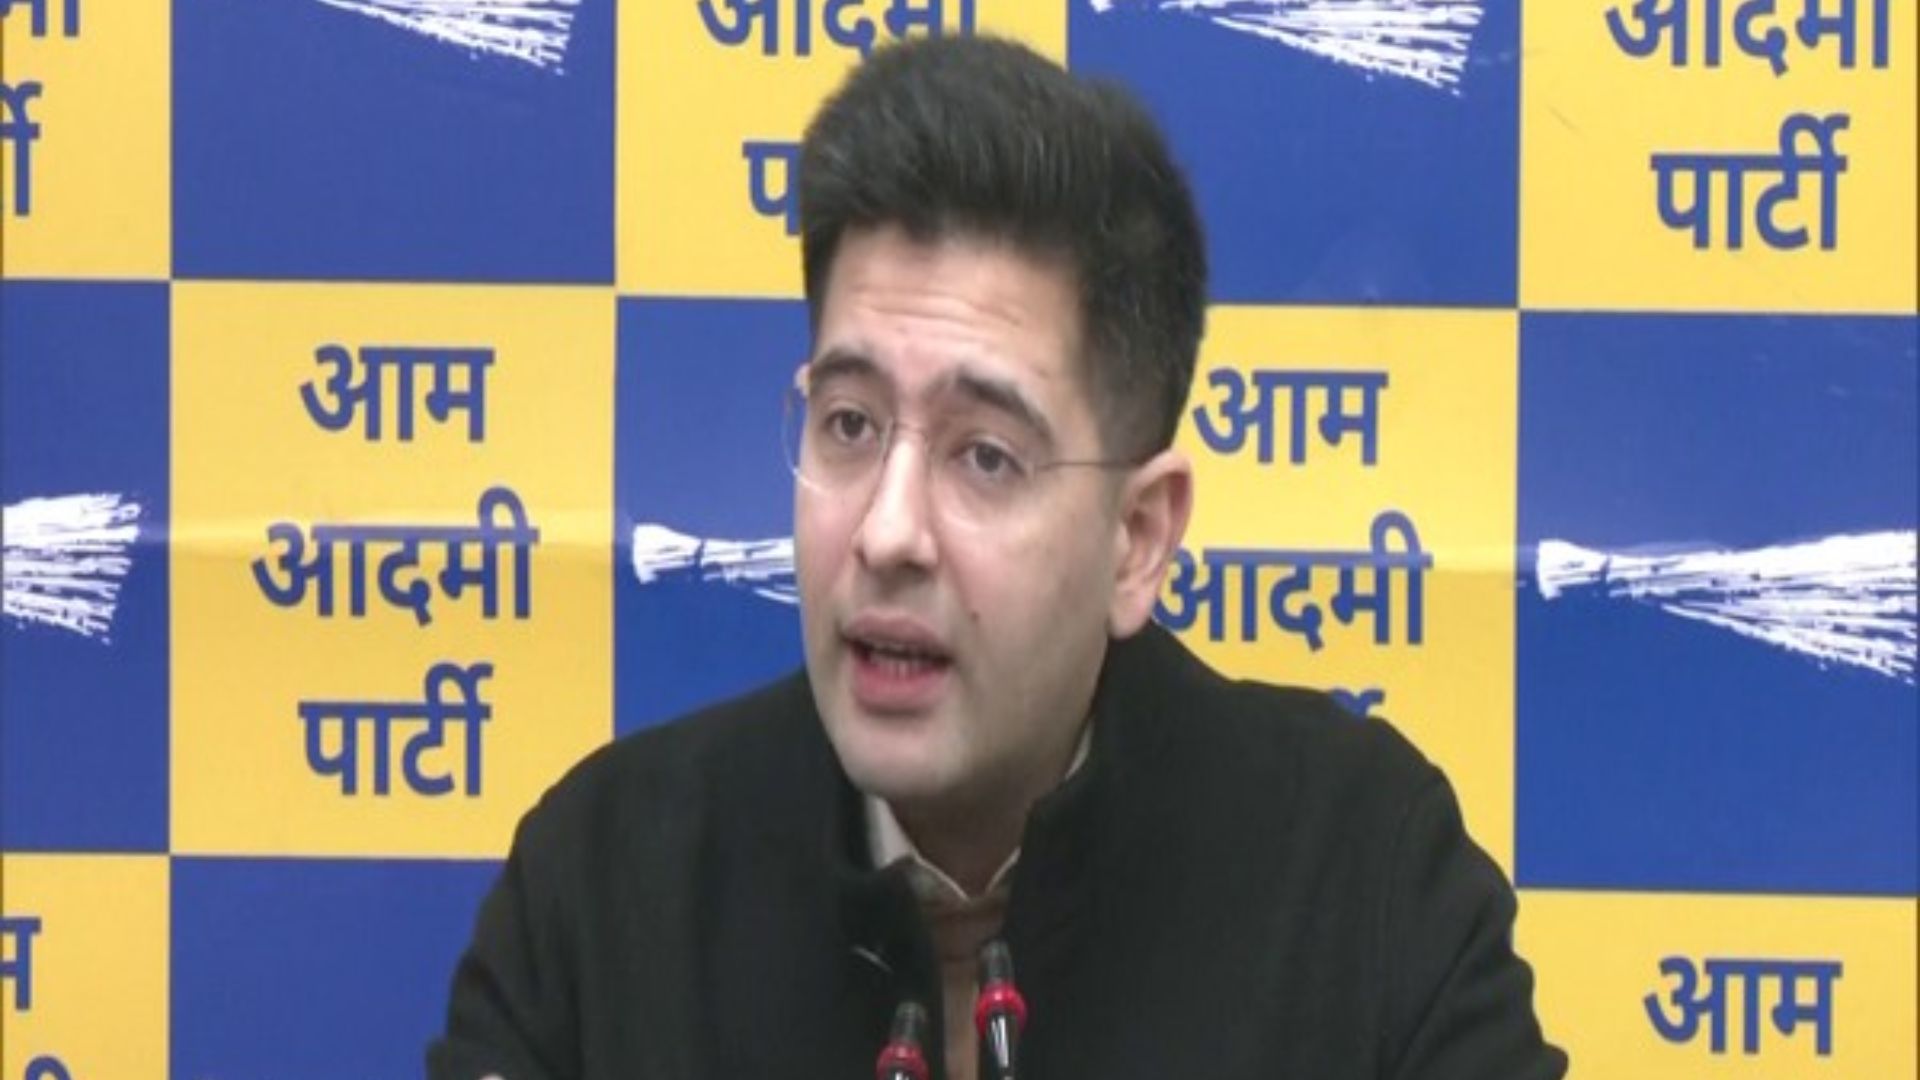 “First match of BJP vs INDIA”: Raghav Chadha after Congress-AAP alliance for Chandigarh mayoral election